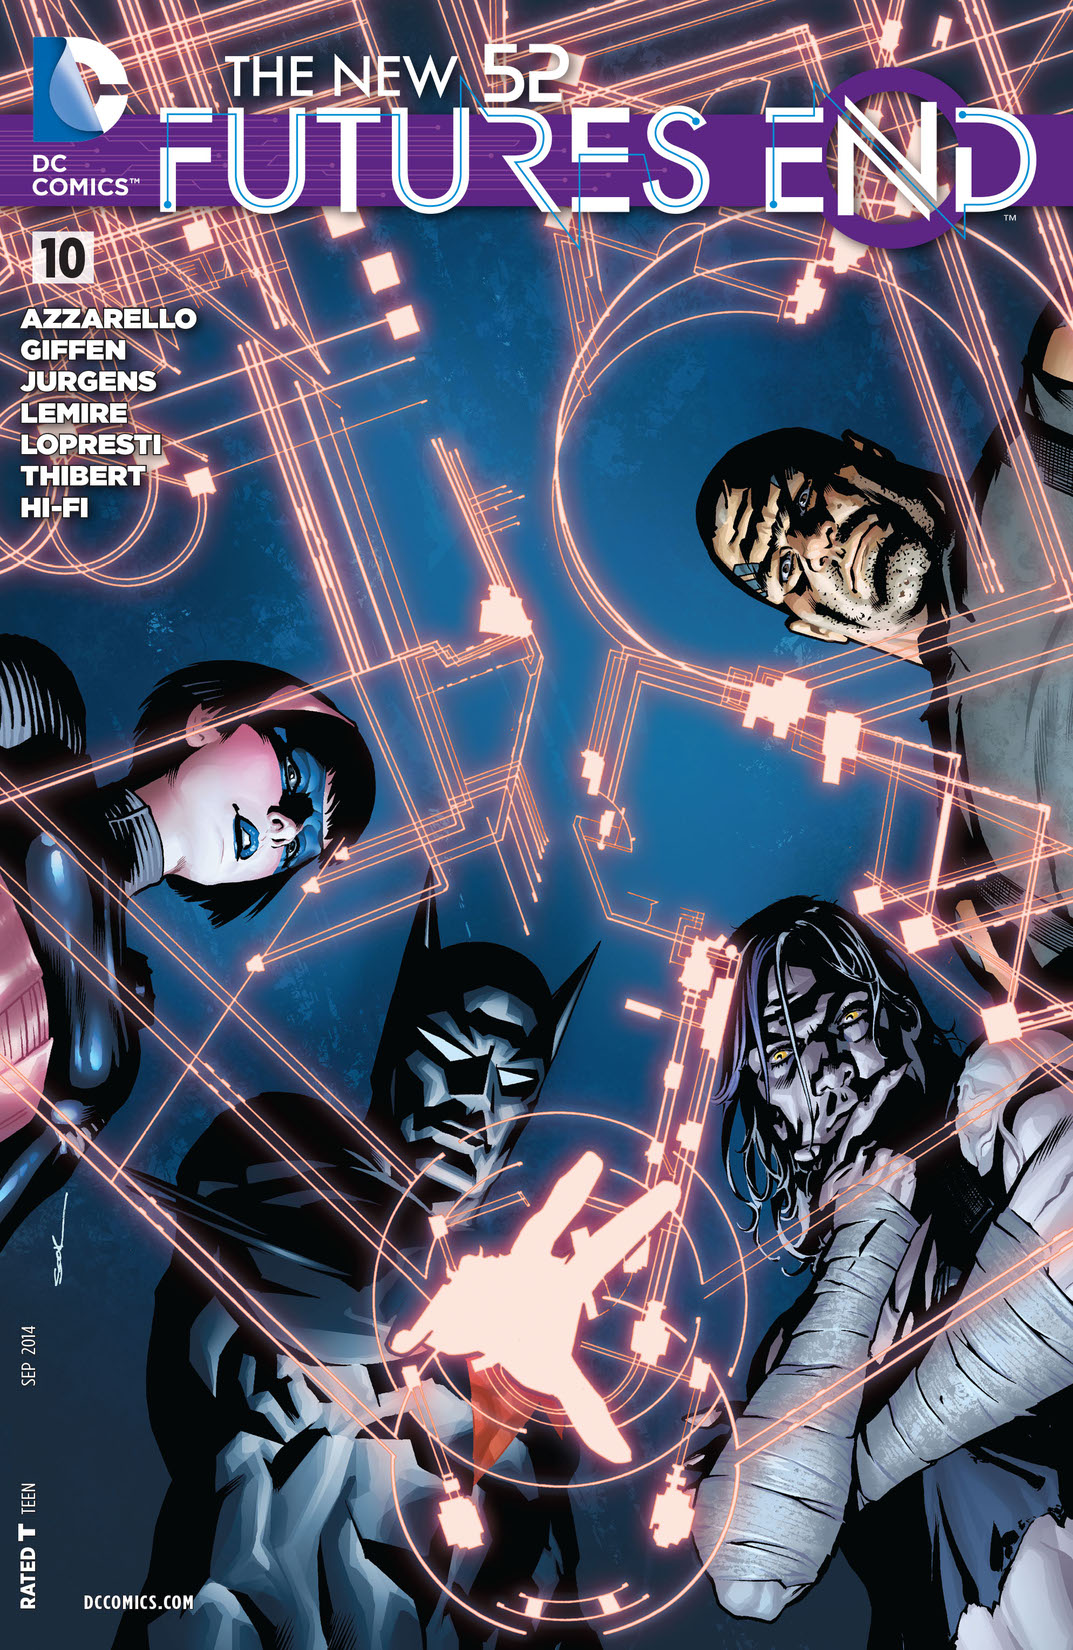 The New 52: Futures End #10 preview images